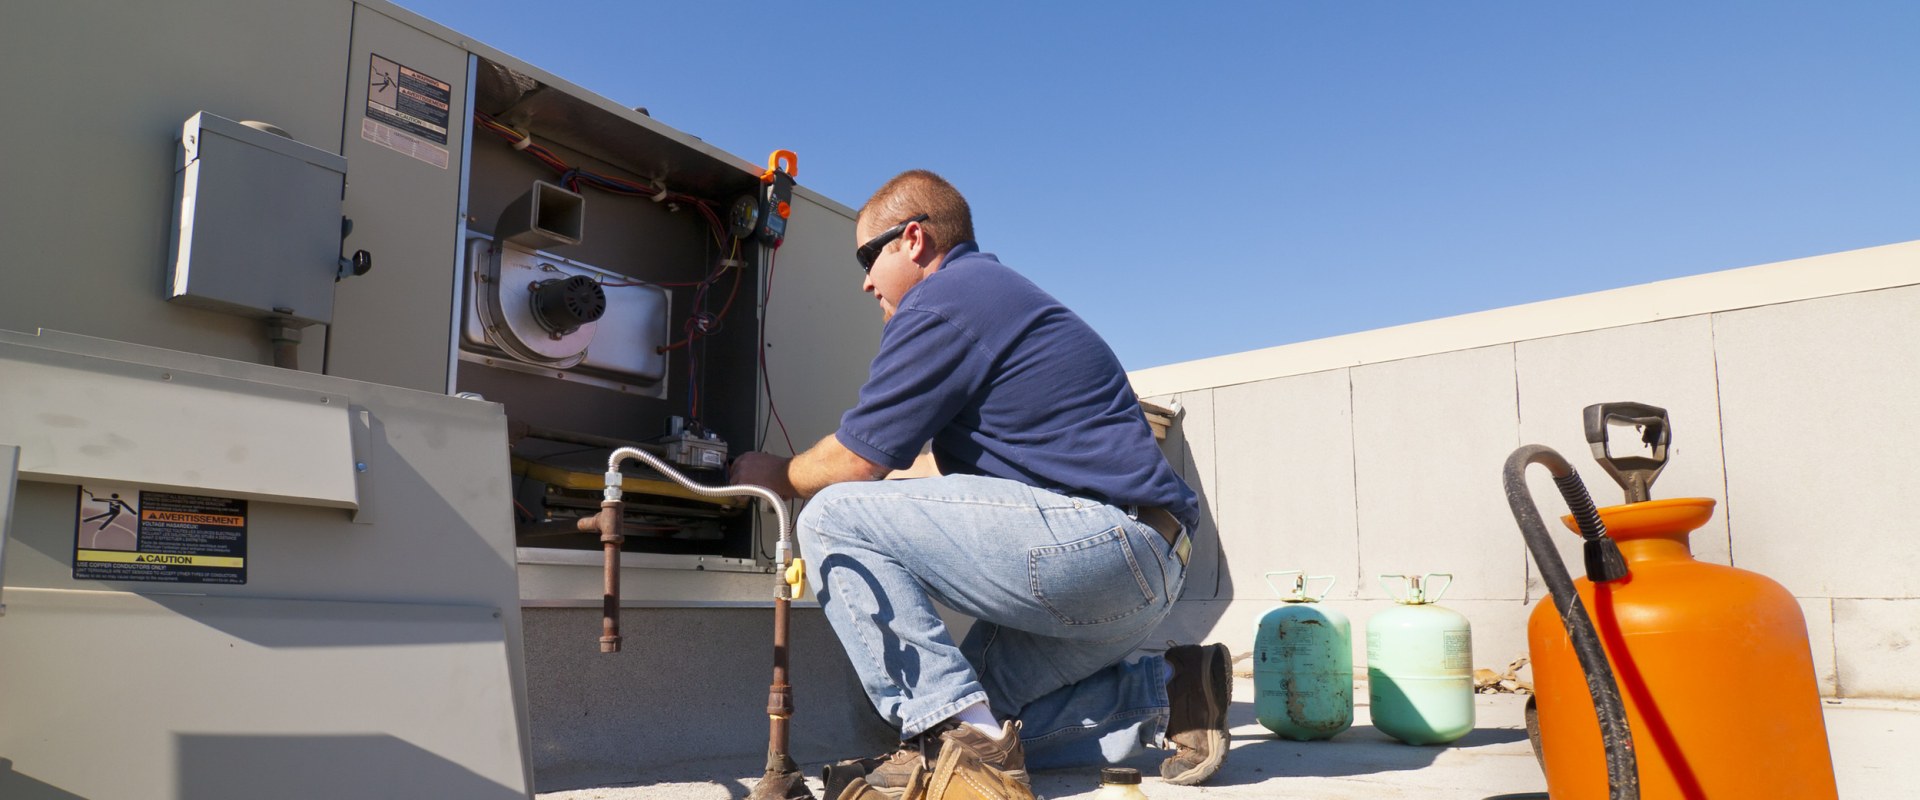 Get Ready for the Hot Florida Summer with an HVAC Tune Up